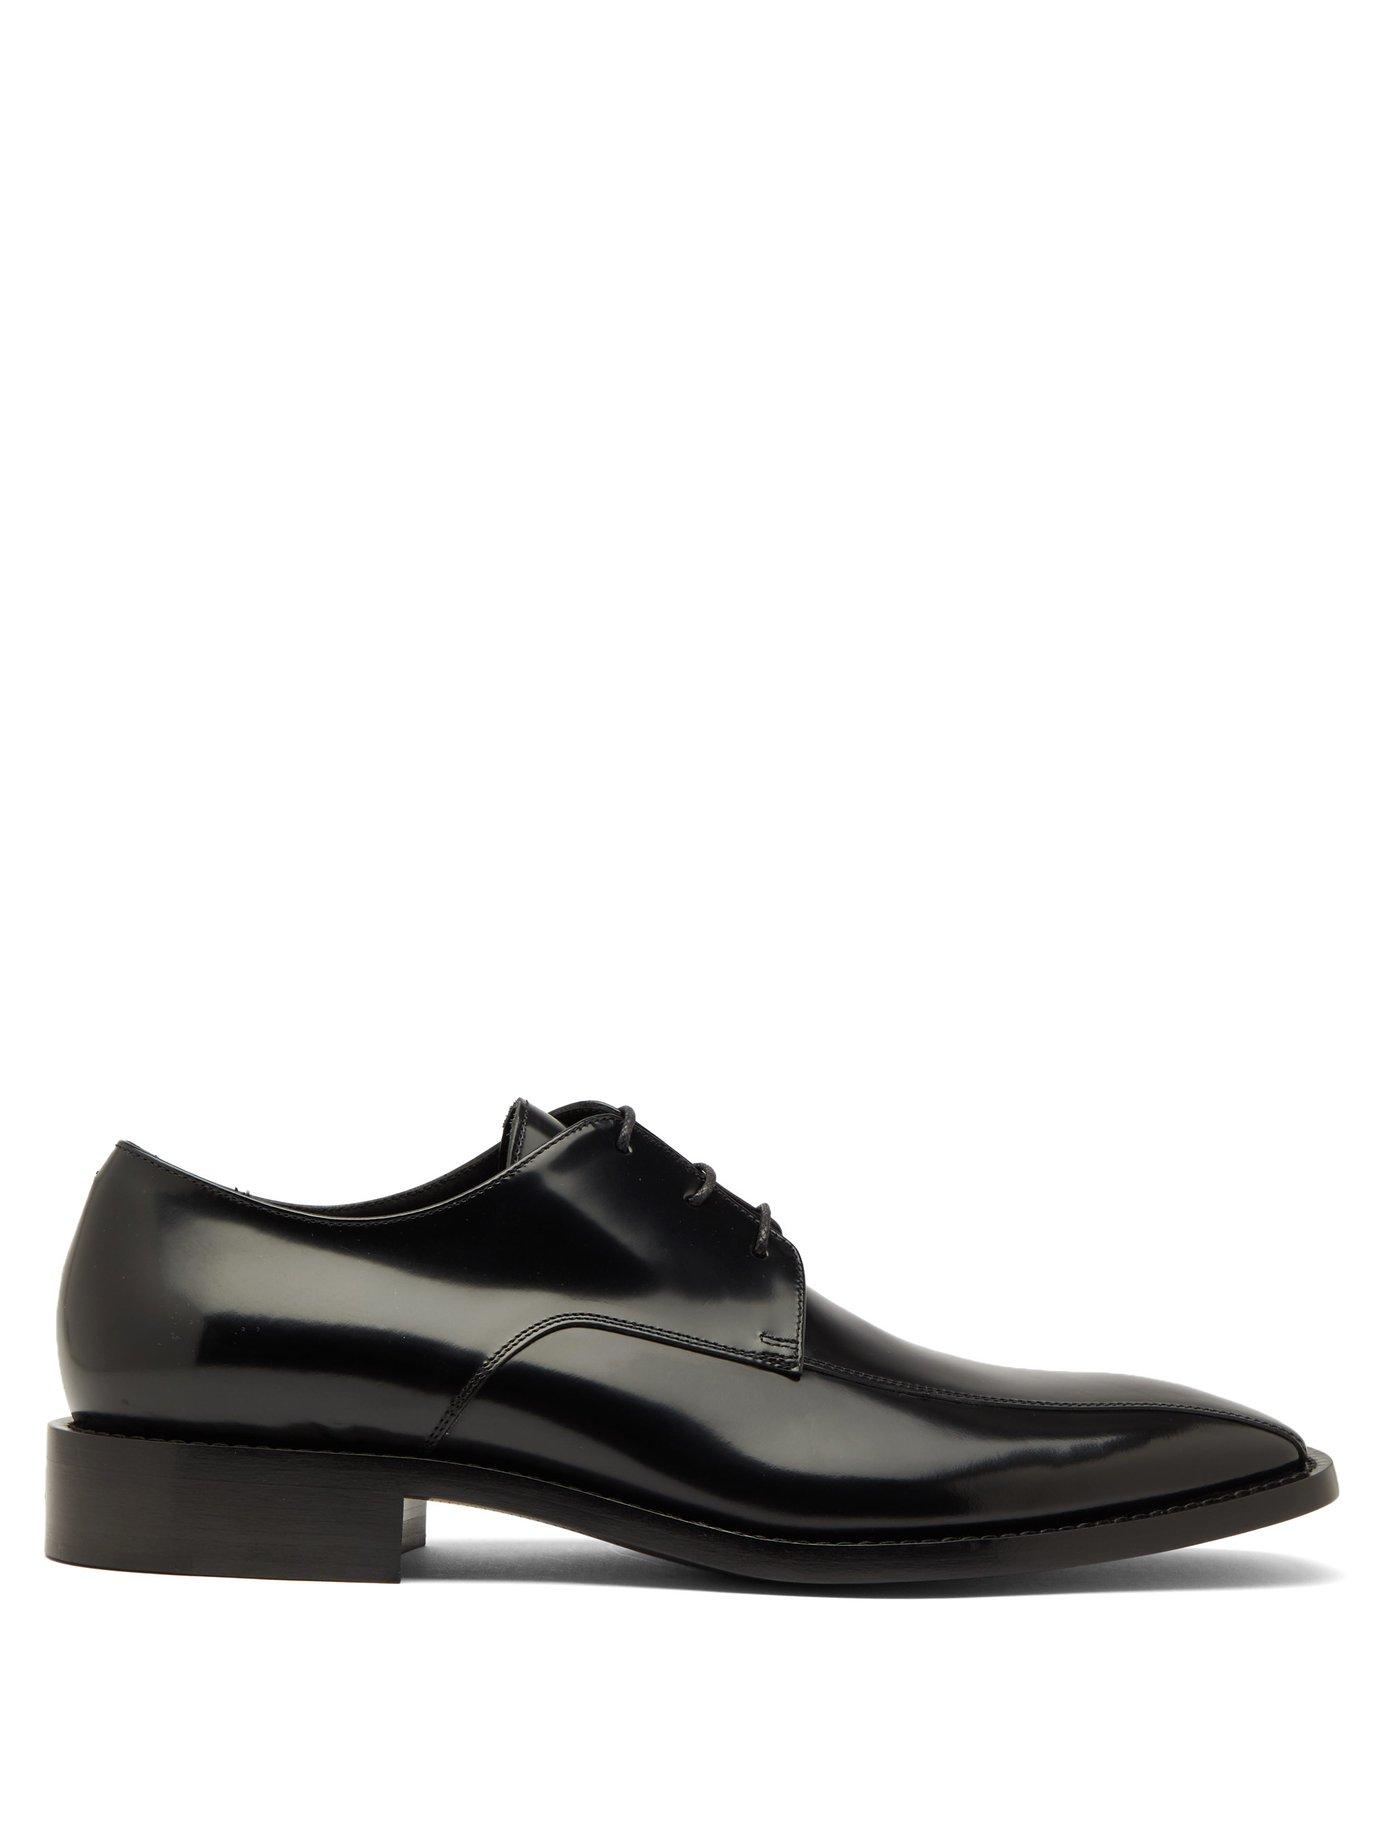 Balenciaga Square Toe Leather Derby Shoes in Black for Men - Lyst